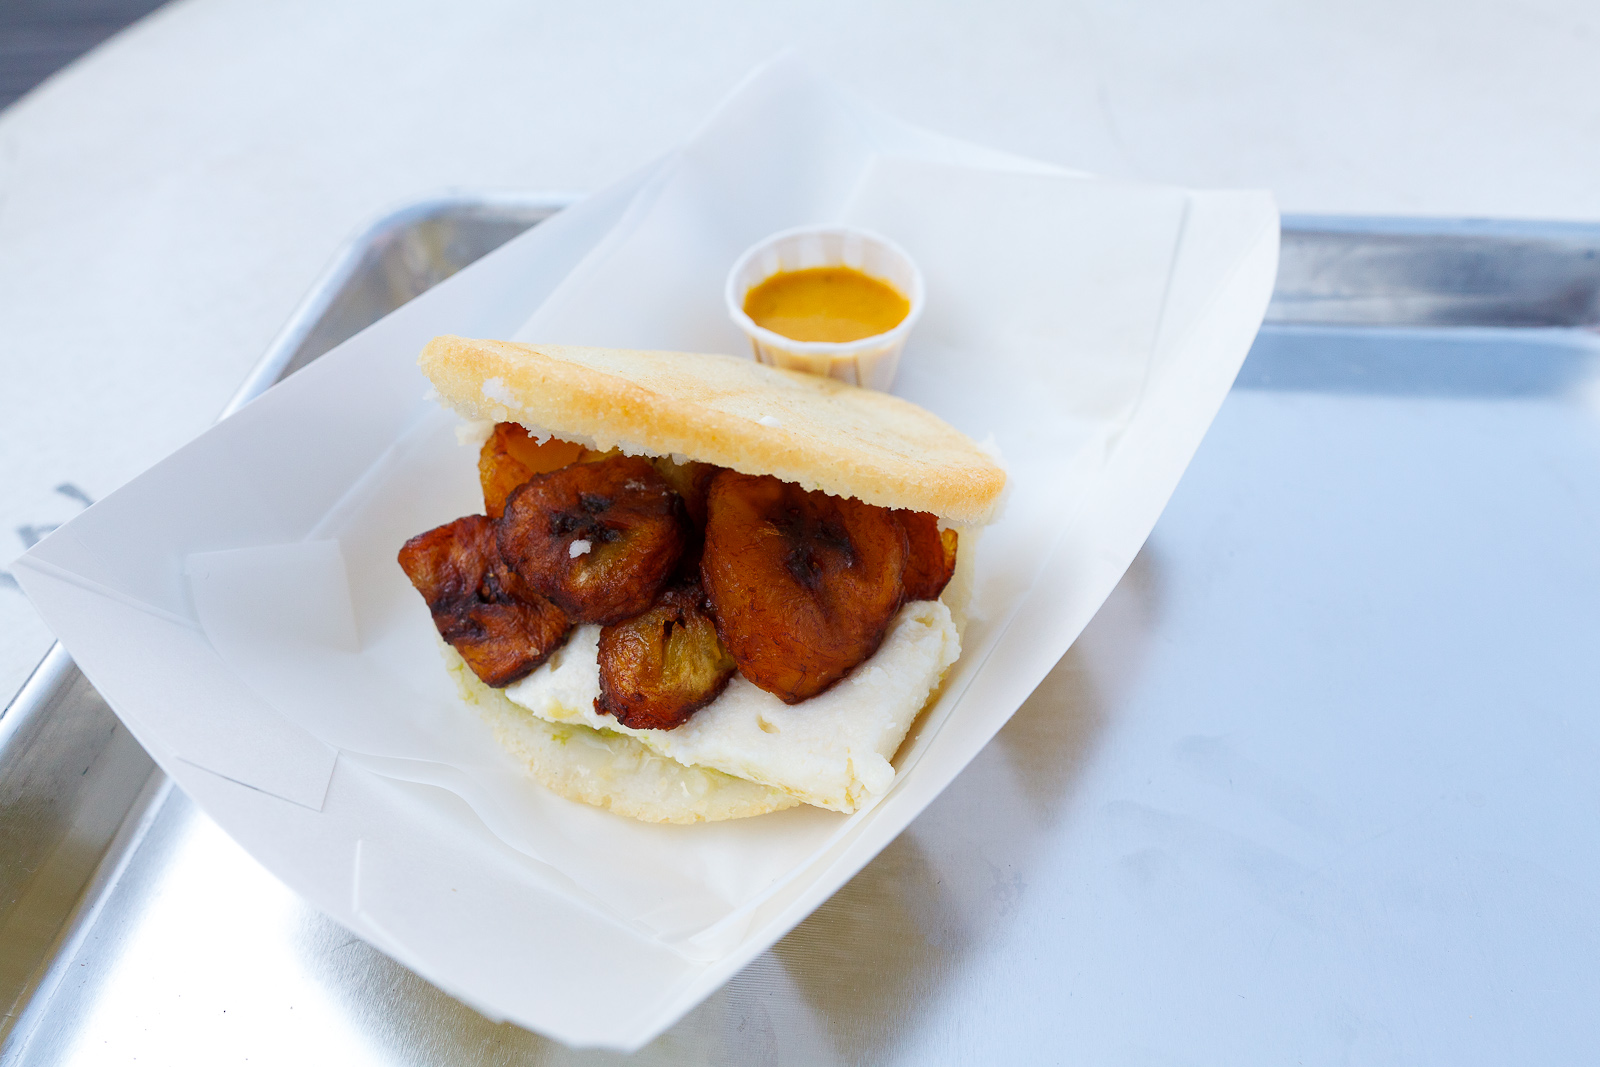 Arepa de pabellón: shredded beef, black beans, white salty cheese, and sweet plantains ($7.50)